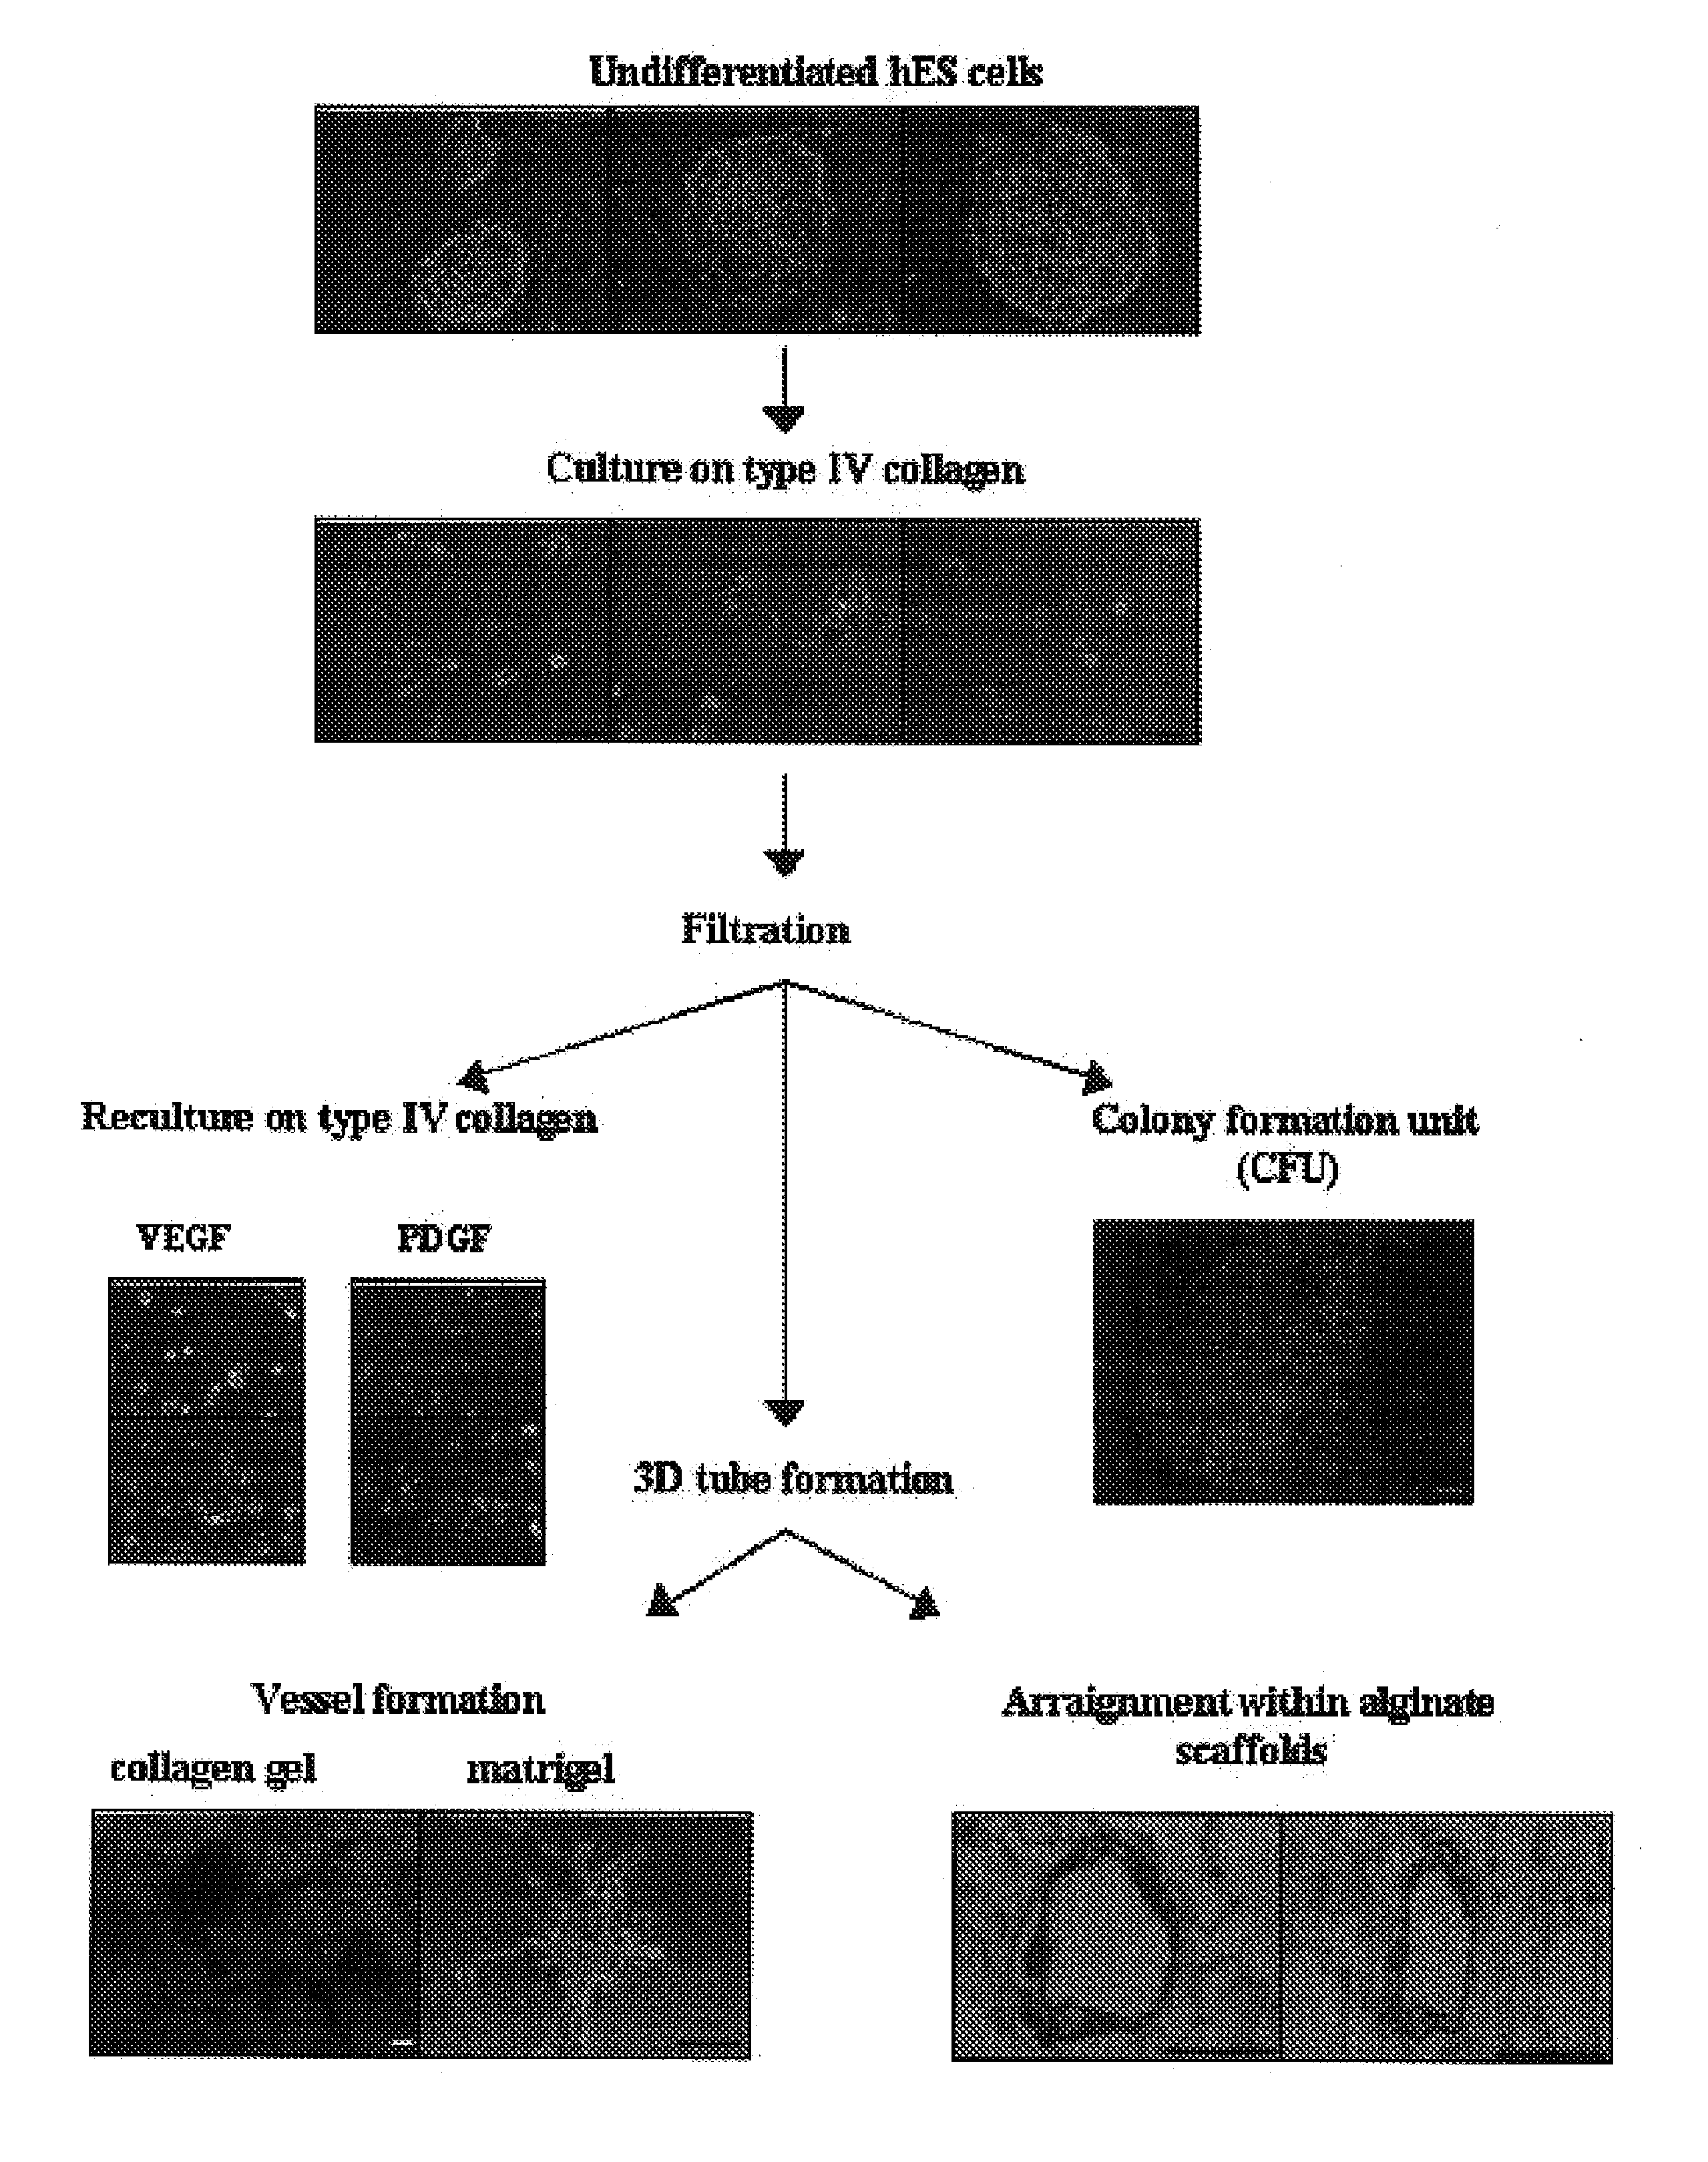 Methods for the in-vitro identification, isolation and differentiation of vasculogenic progenitor cells